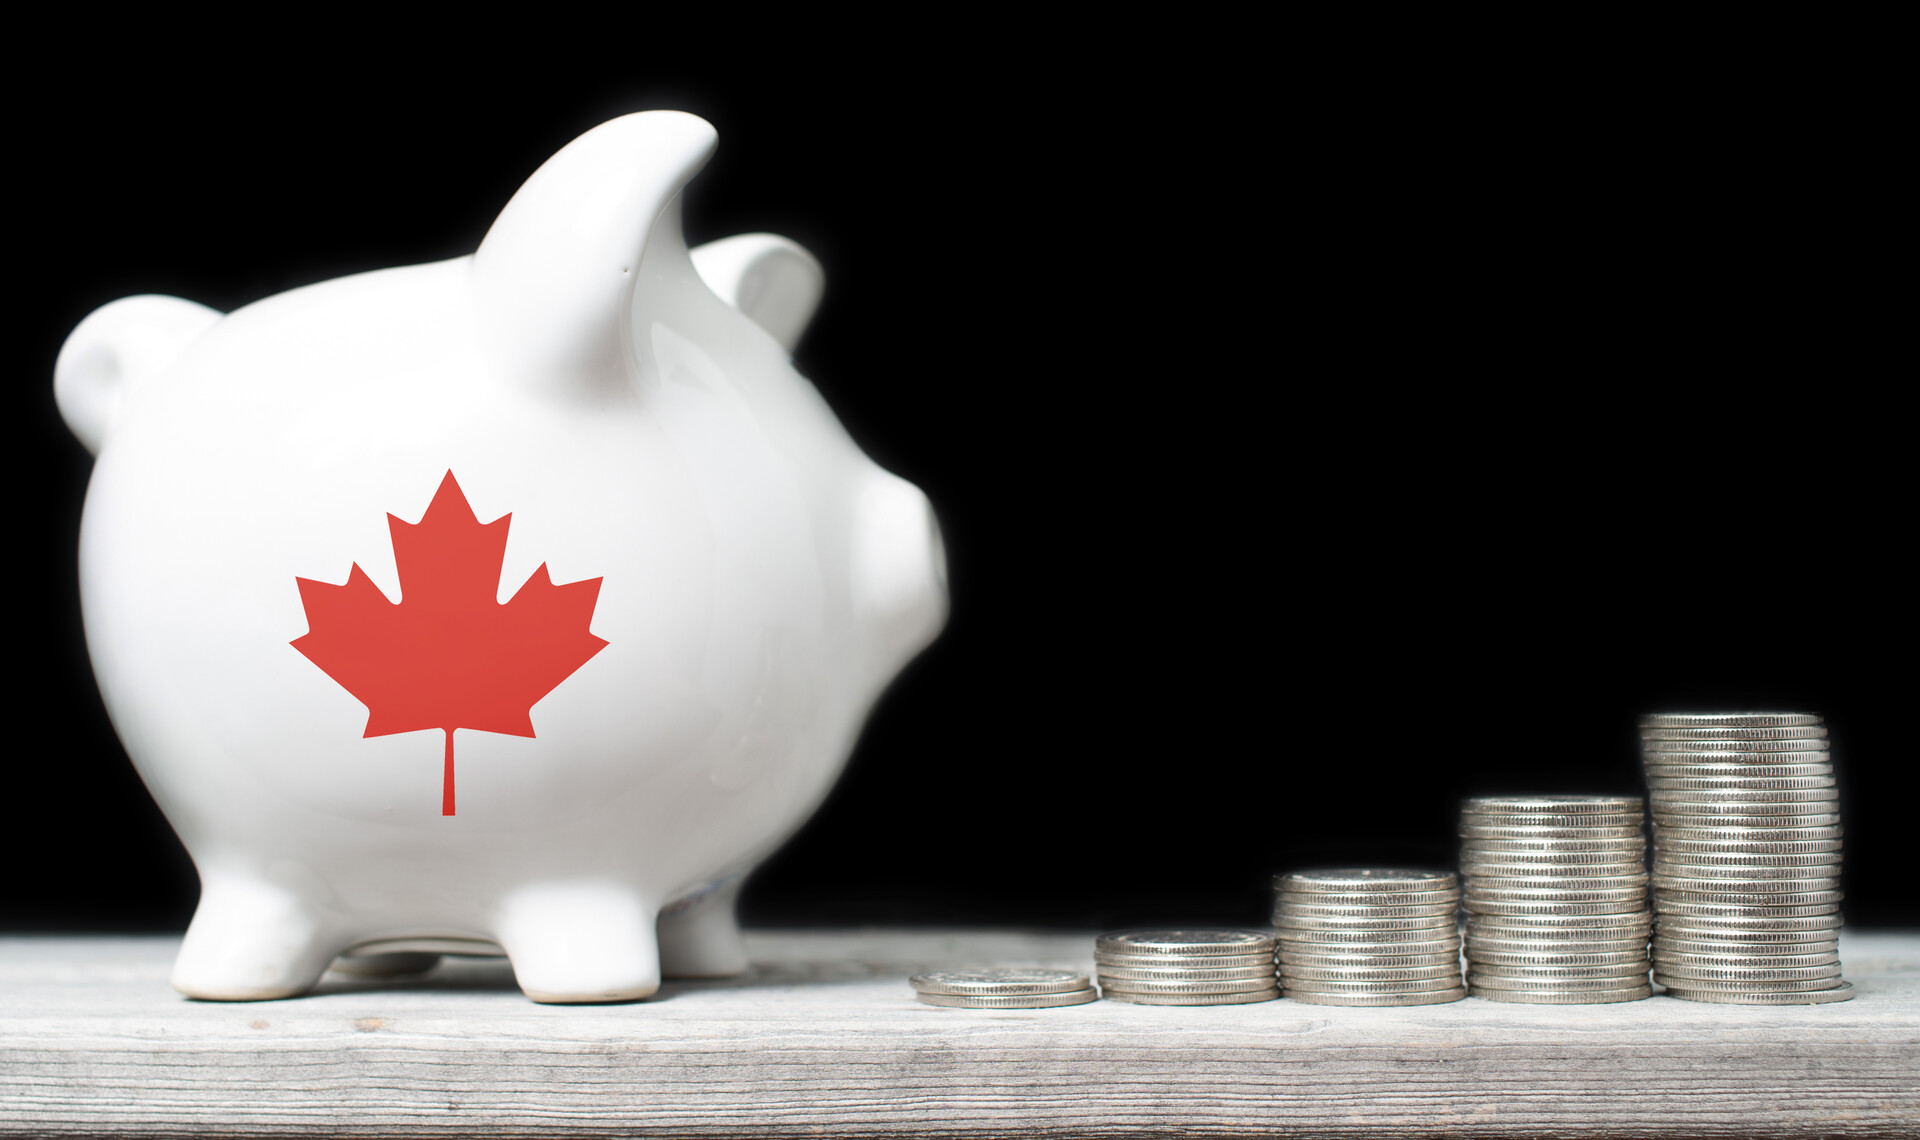 piggy bank with canadian flag and stack of money